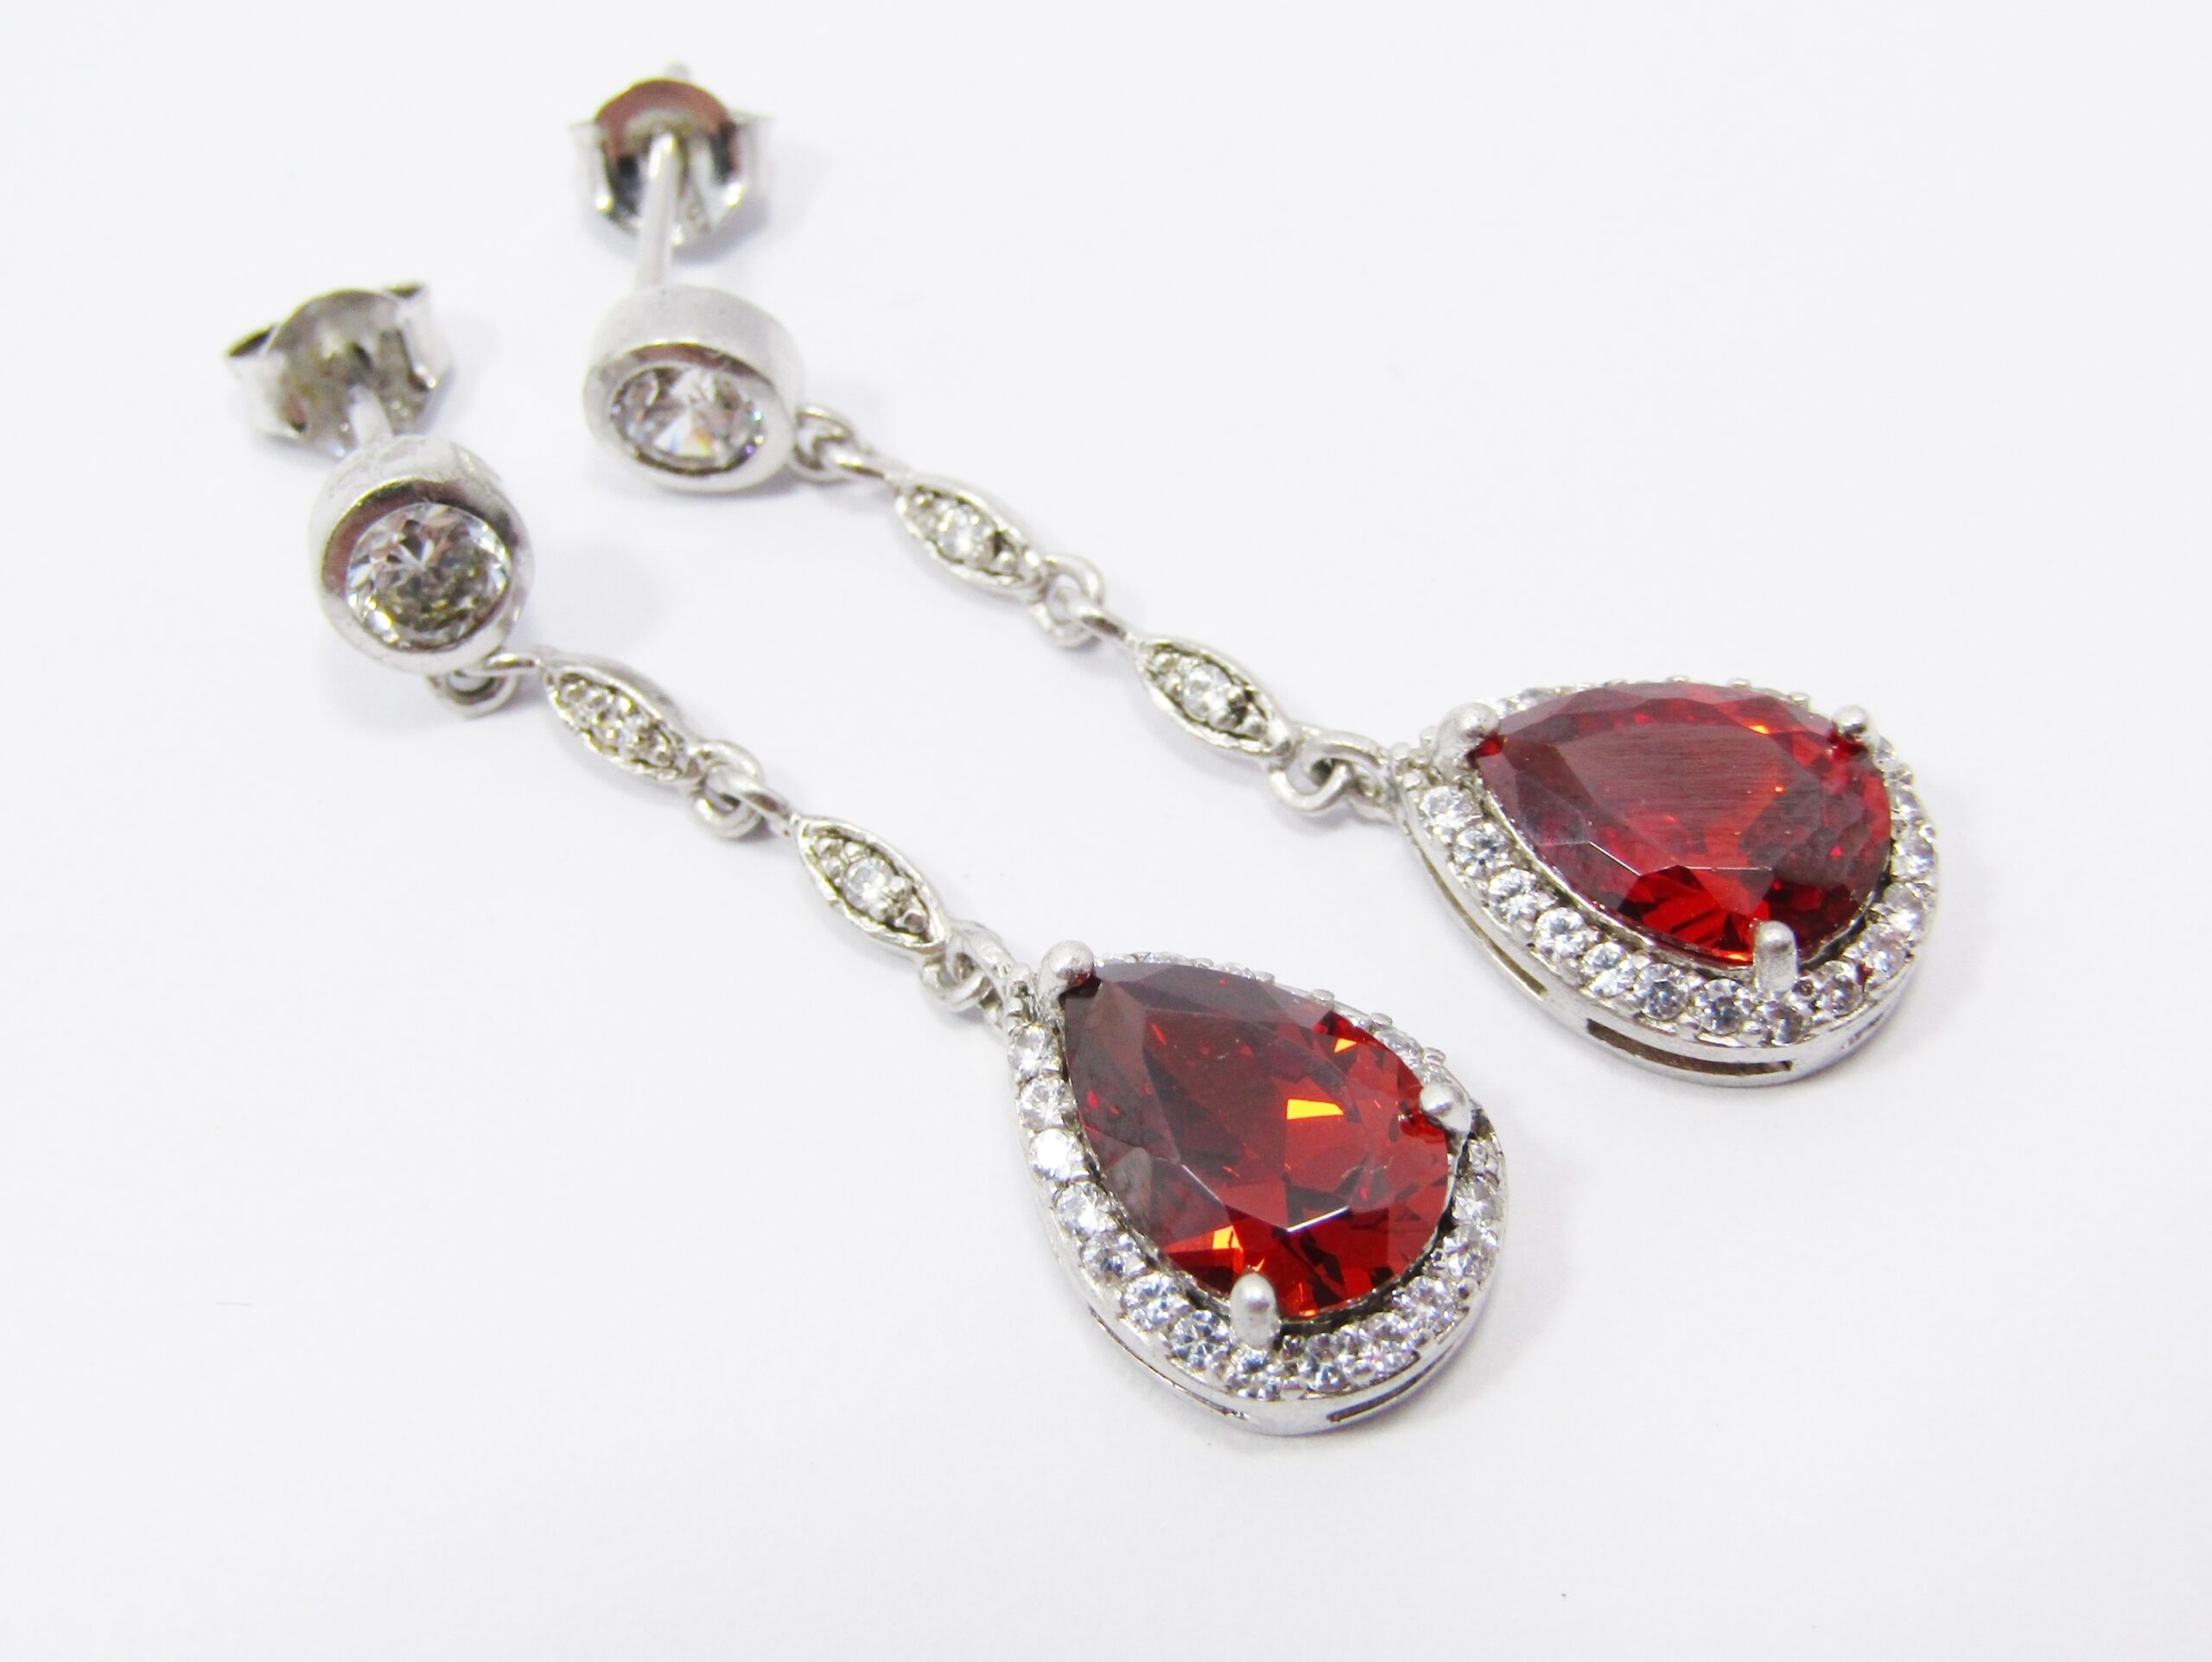 A Gorgeous Pair of Red Stone Zirconia Dangling Earrings in Sterling Silver.